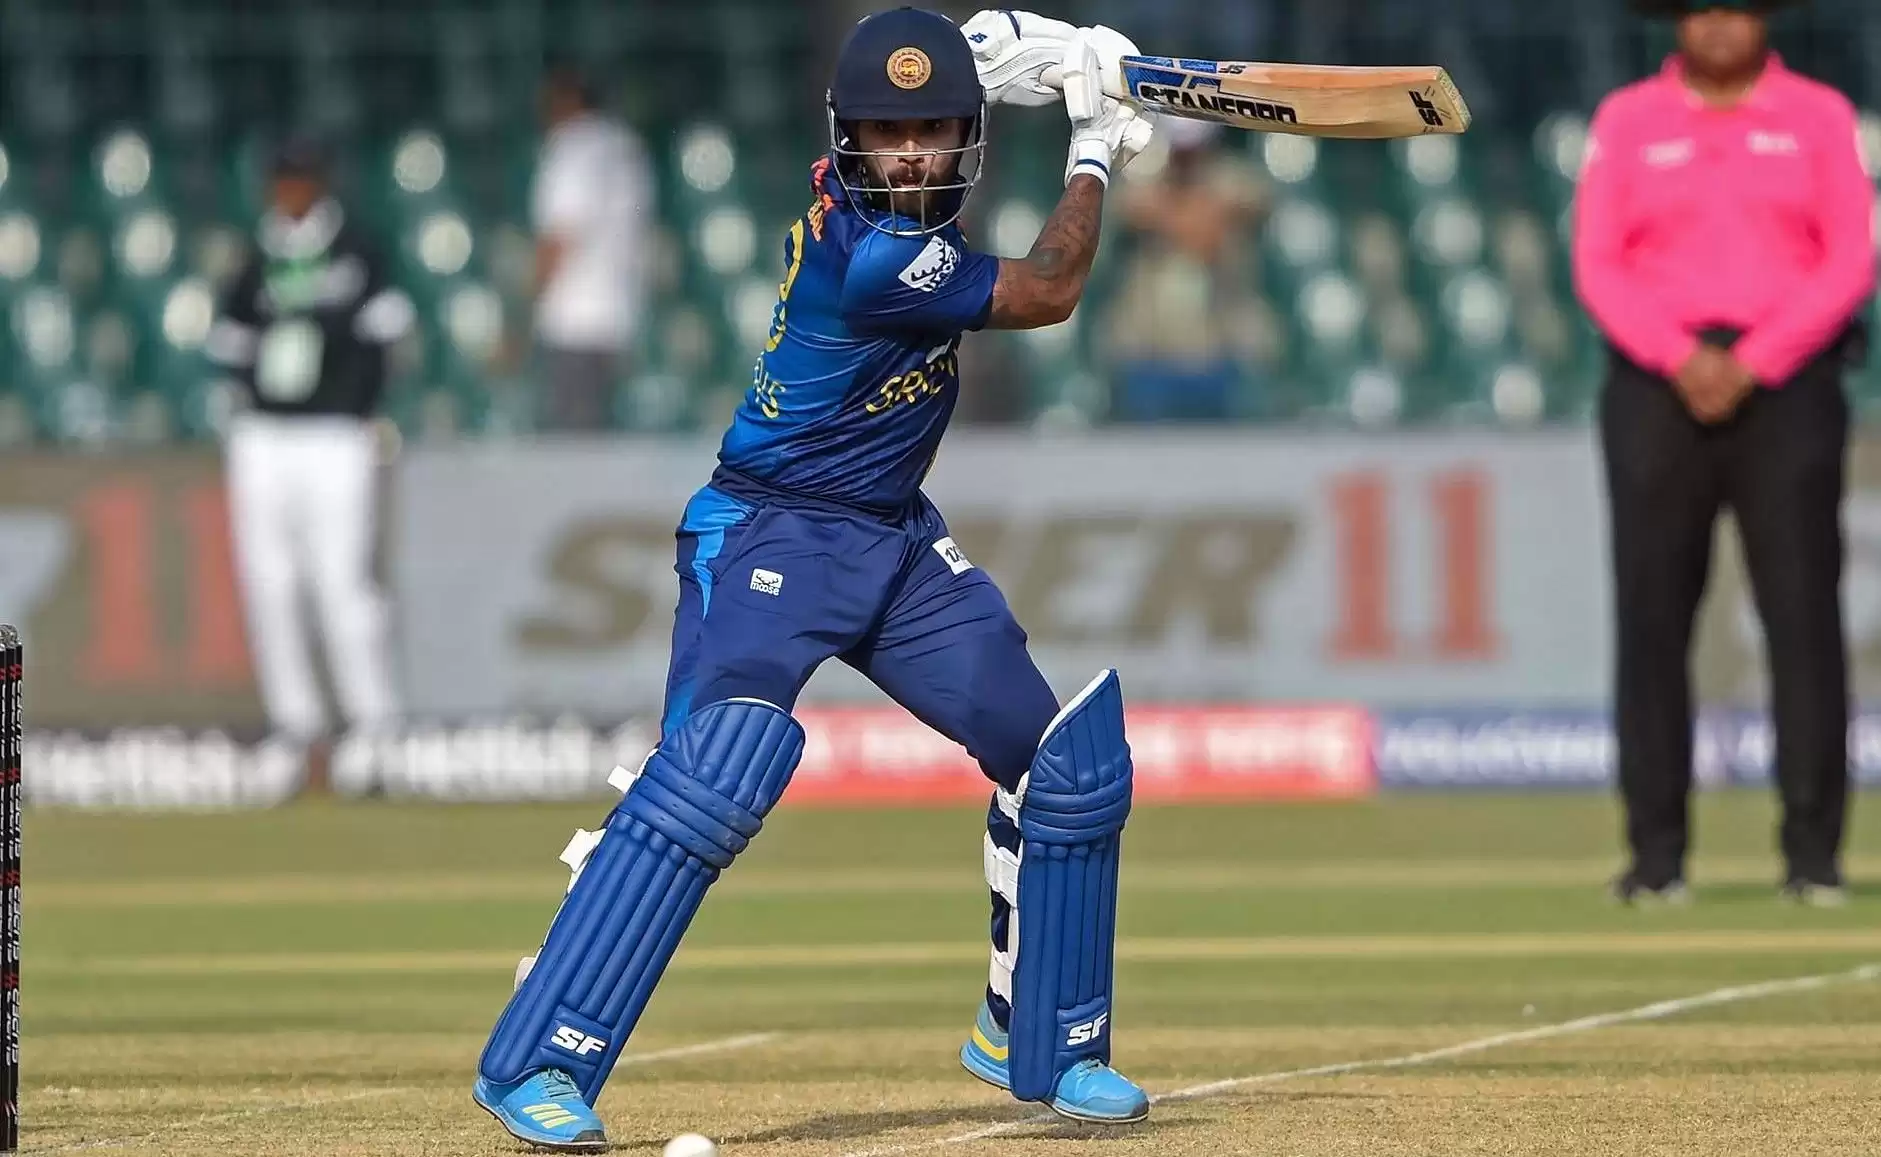 Asia Cup 2023: Kusal Mendis and Matheesha Pathirana emerge as top run-getters and wicket-takers after Sri Lanka vs Pakistan match (Updated)